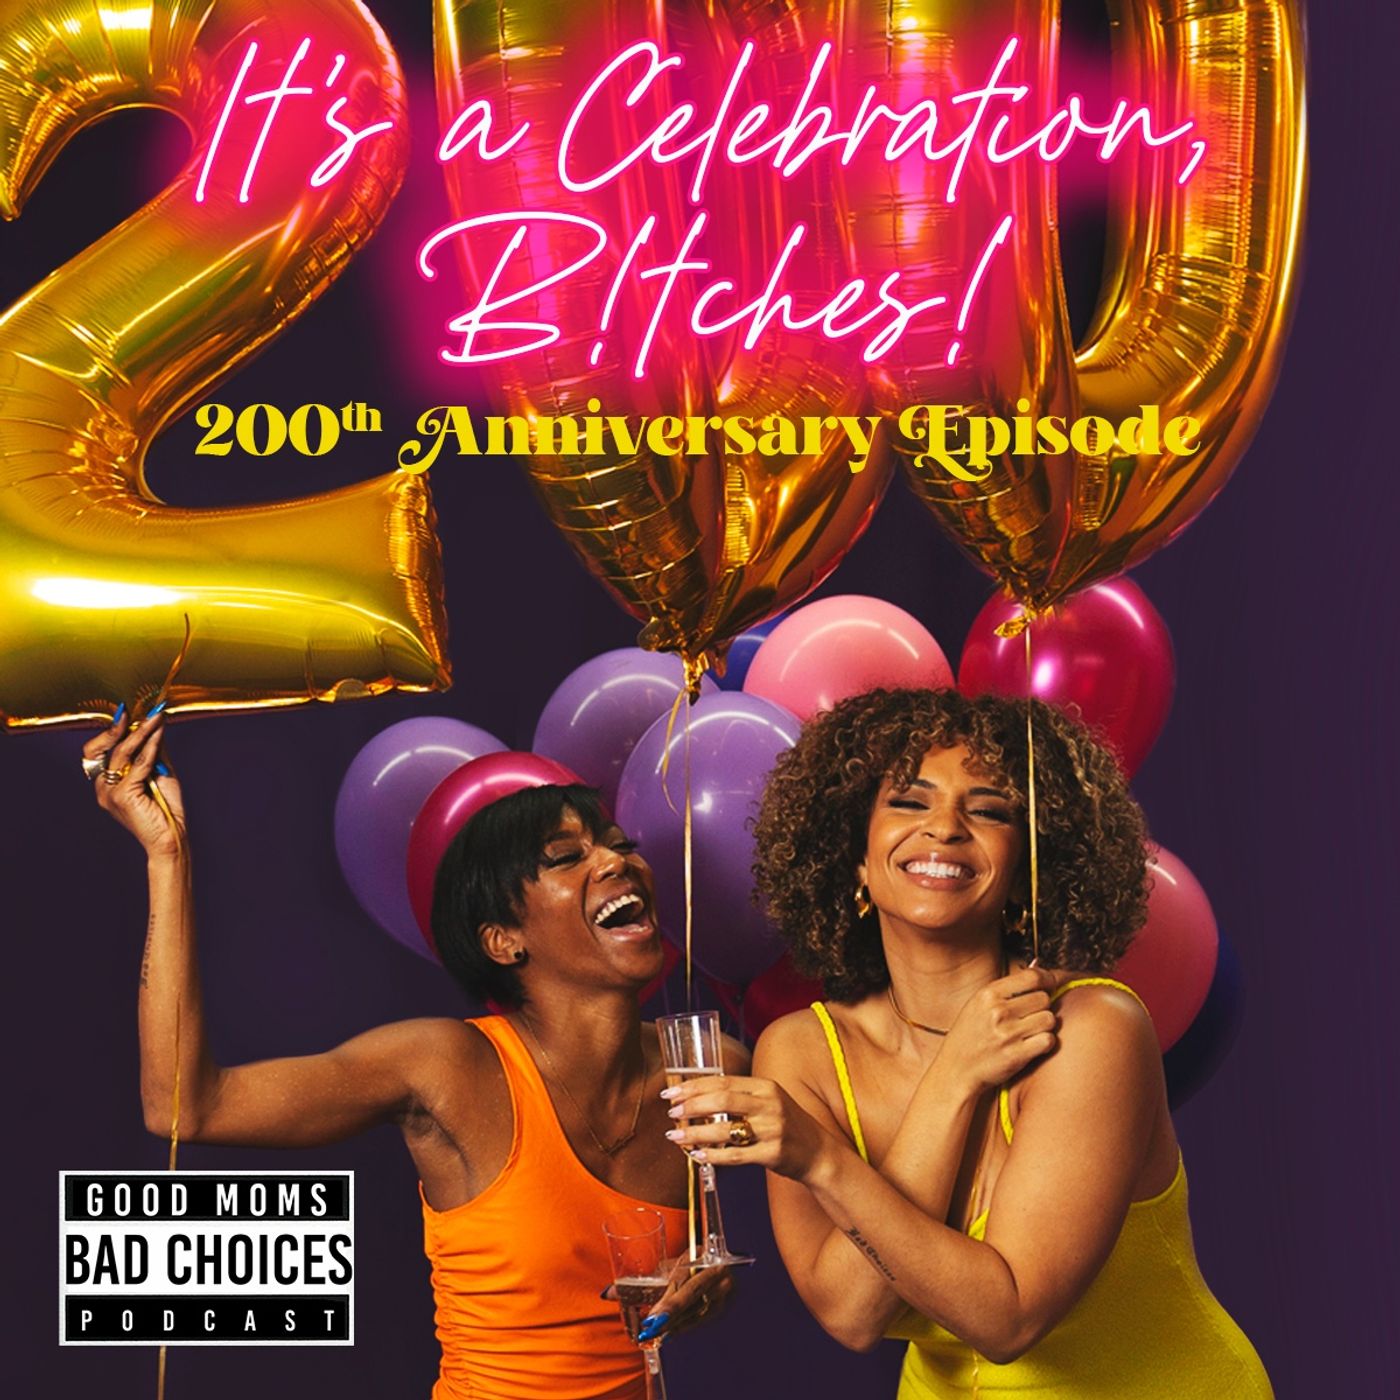 It's a Celebration B!tches! 200th Anniversary Episode Image